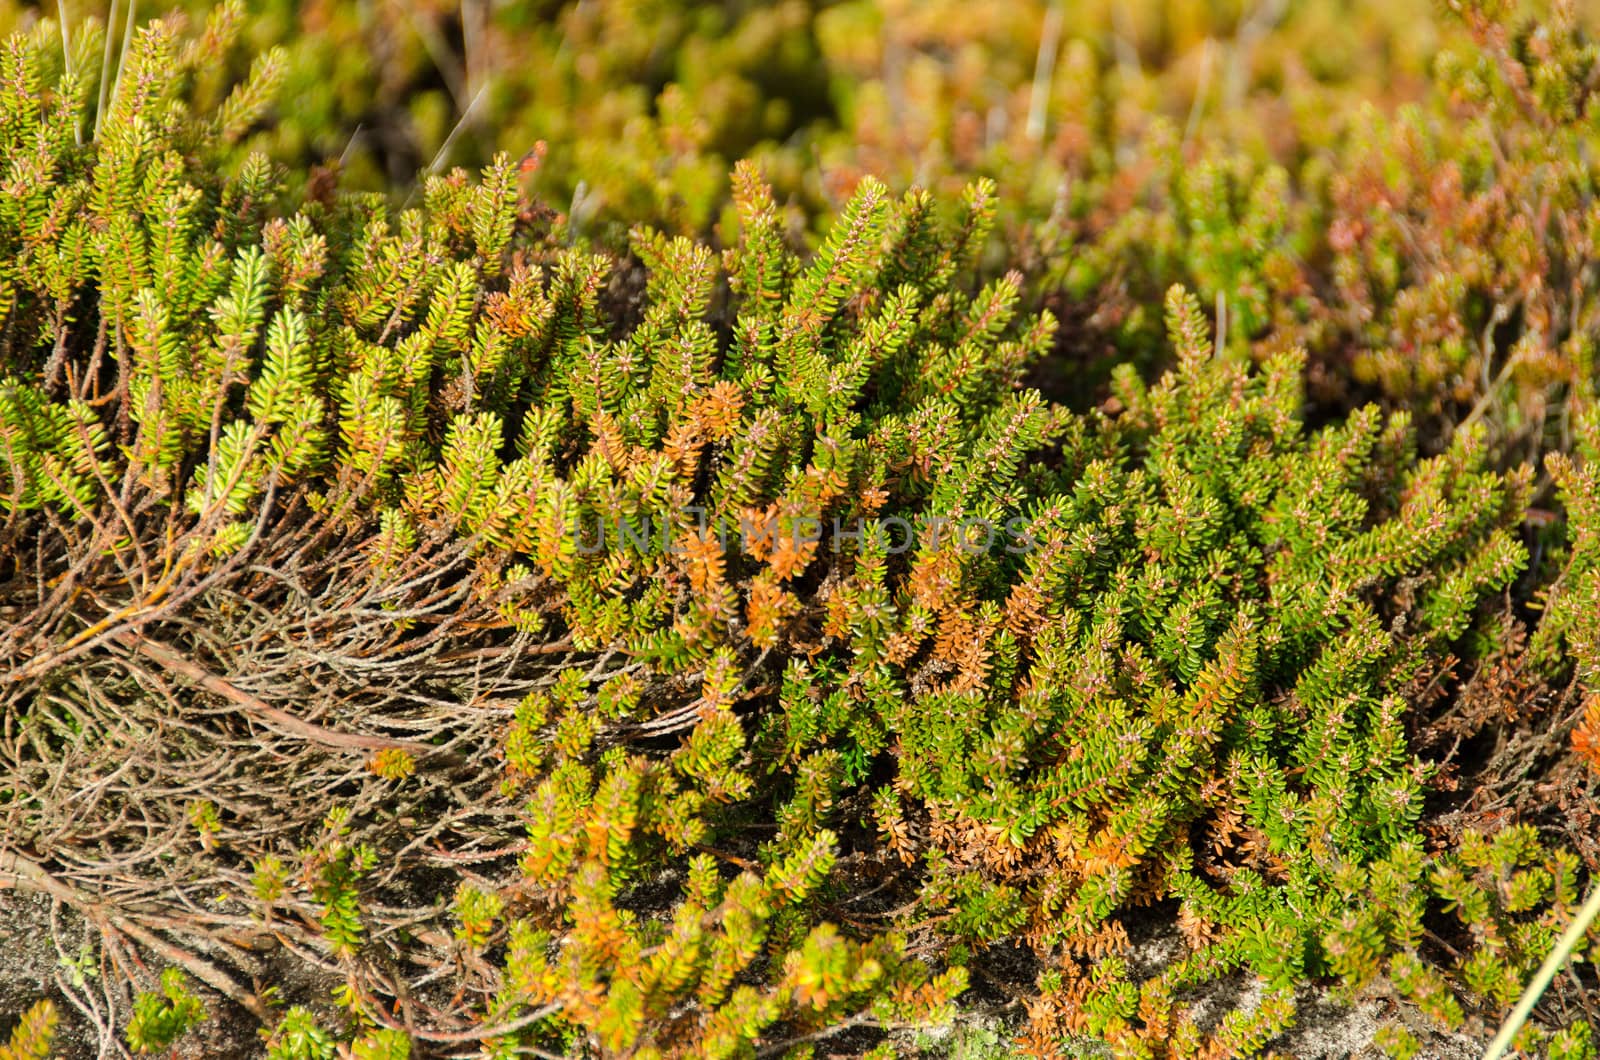 Empetrum or crowberry by Arrxxx